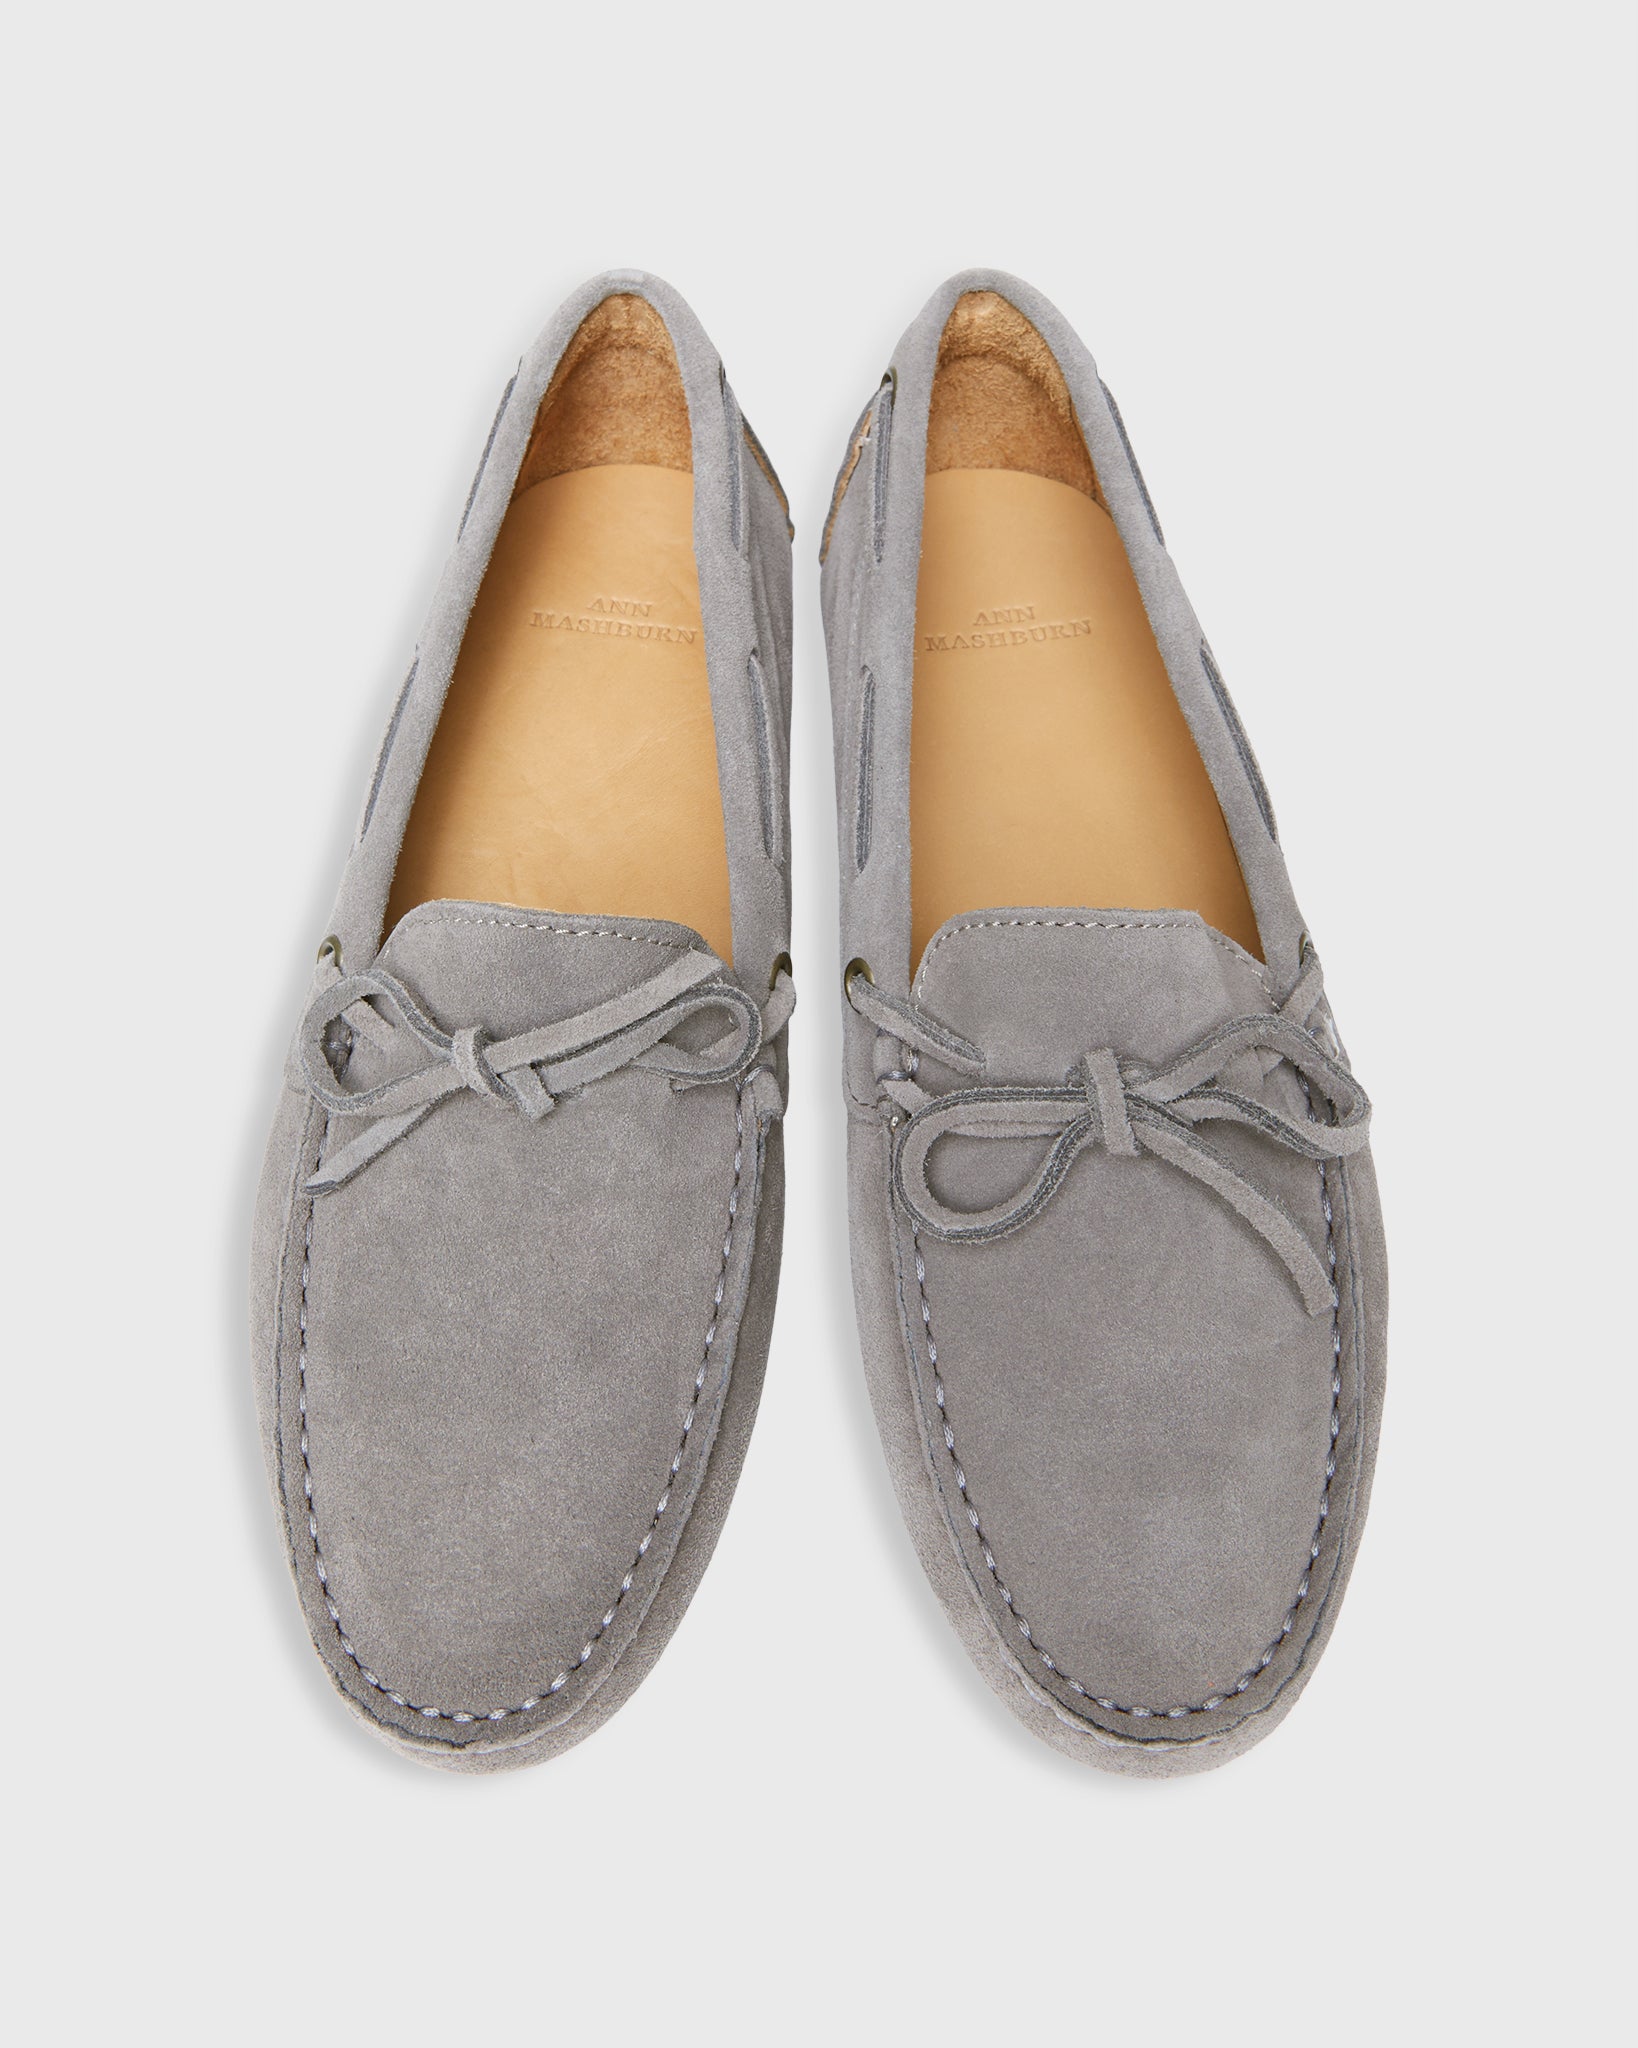 Driving Moccasin in Pewter Suede